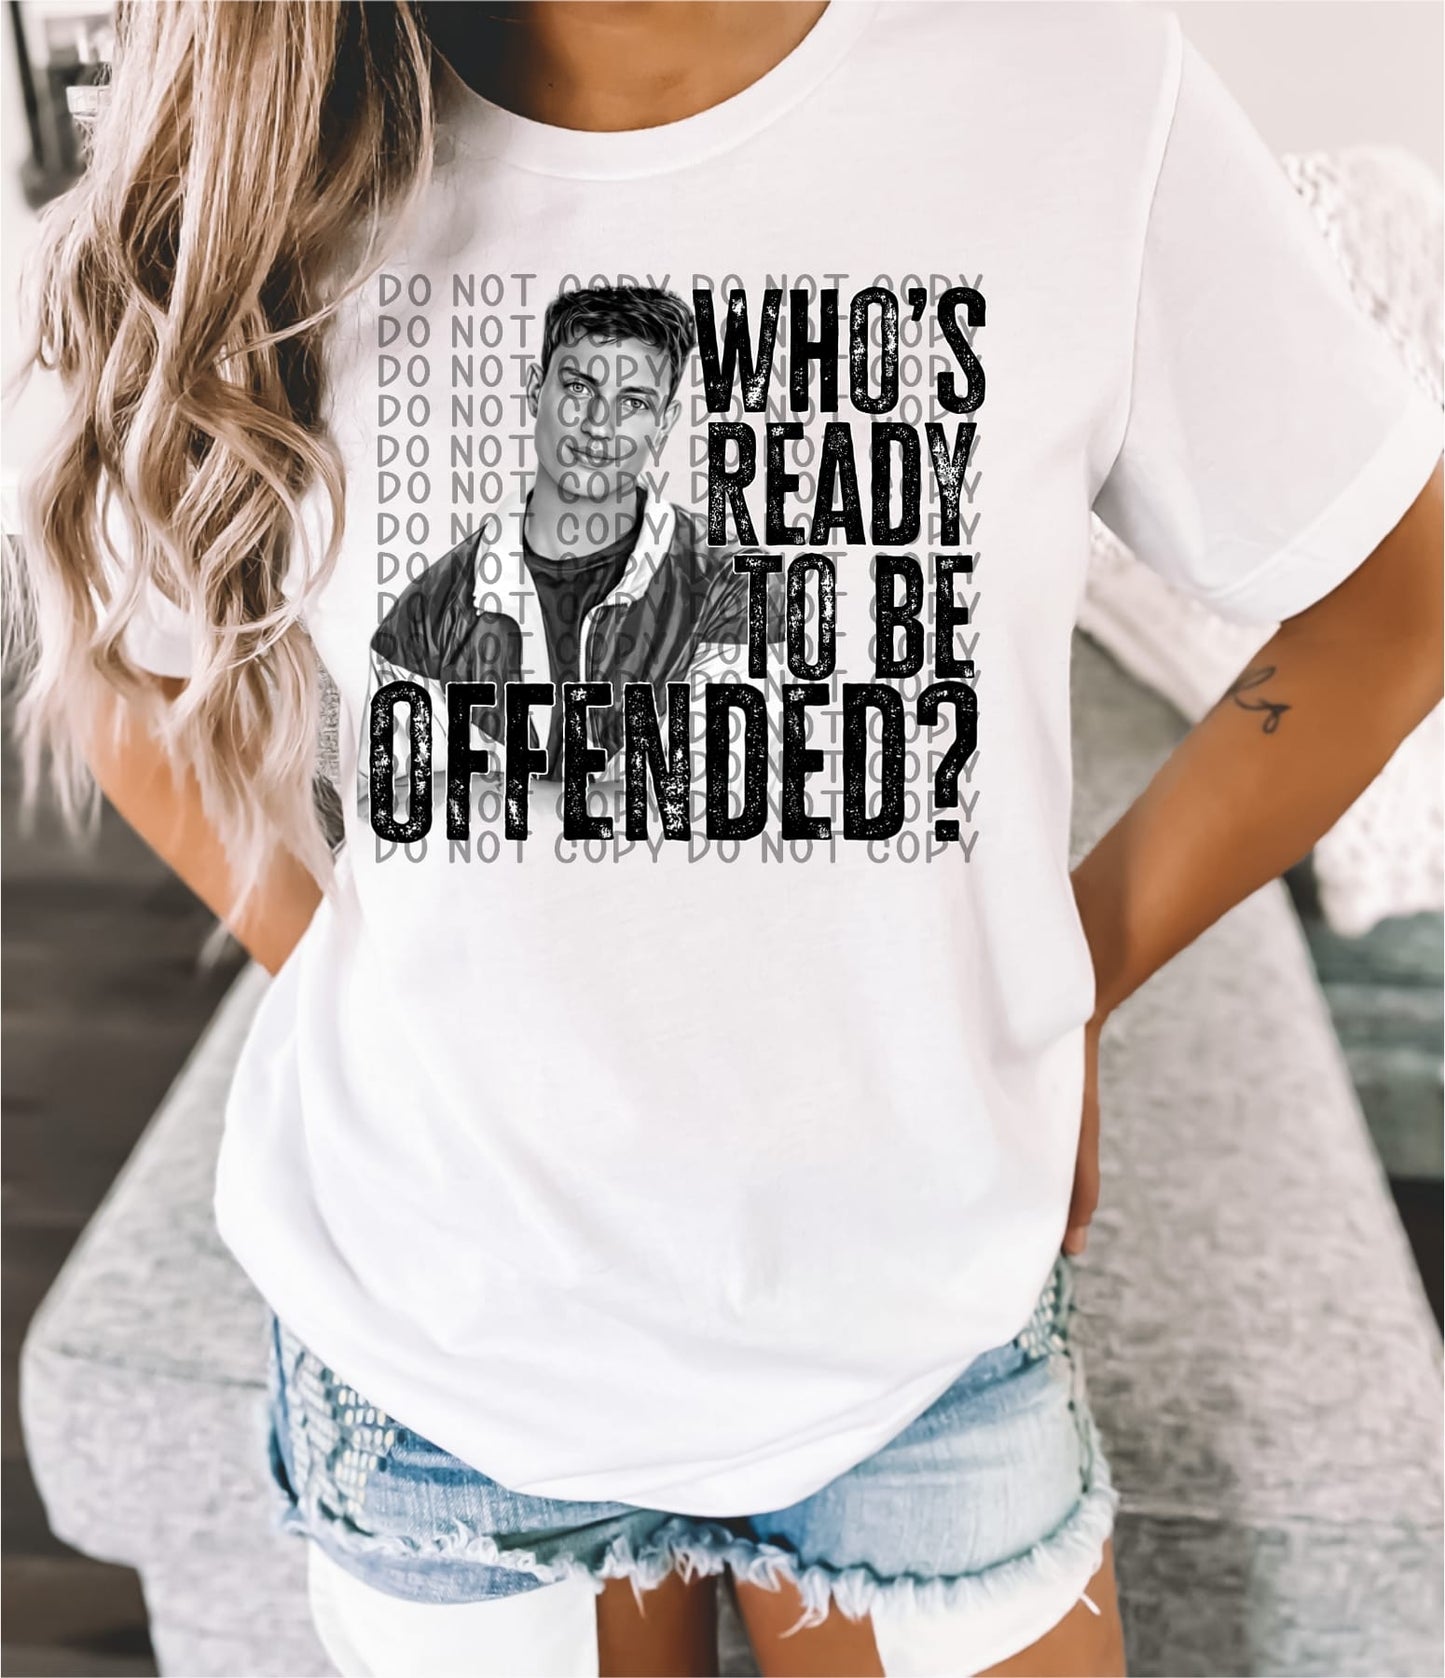 Ready to Be Offended